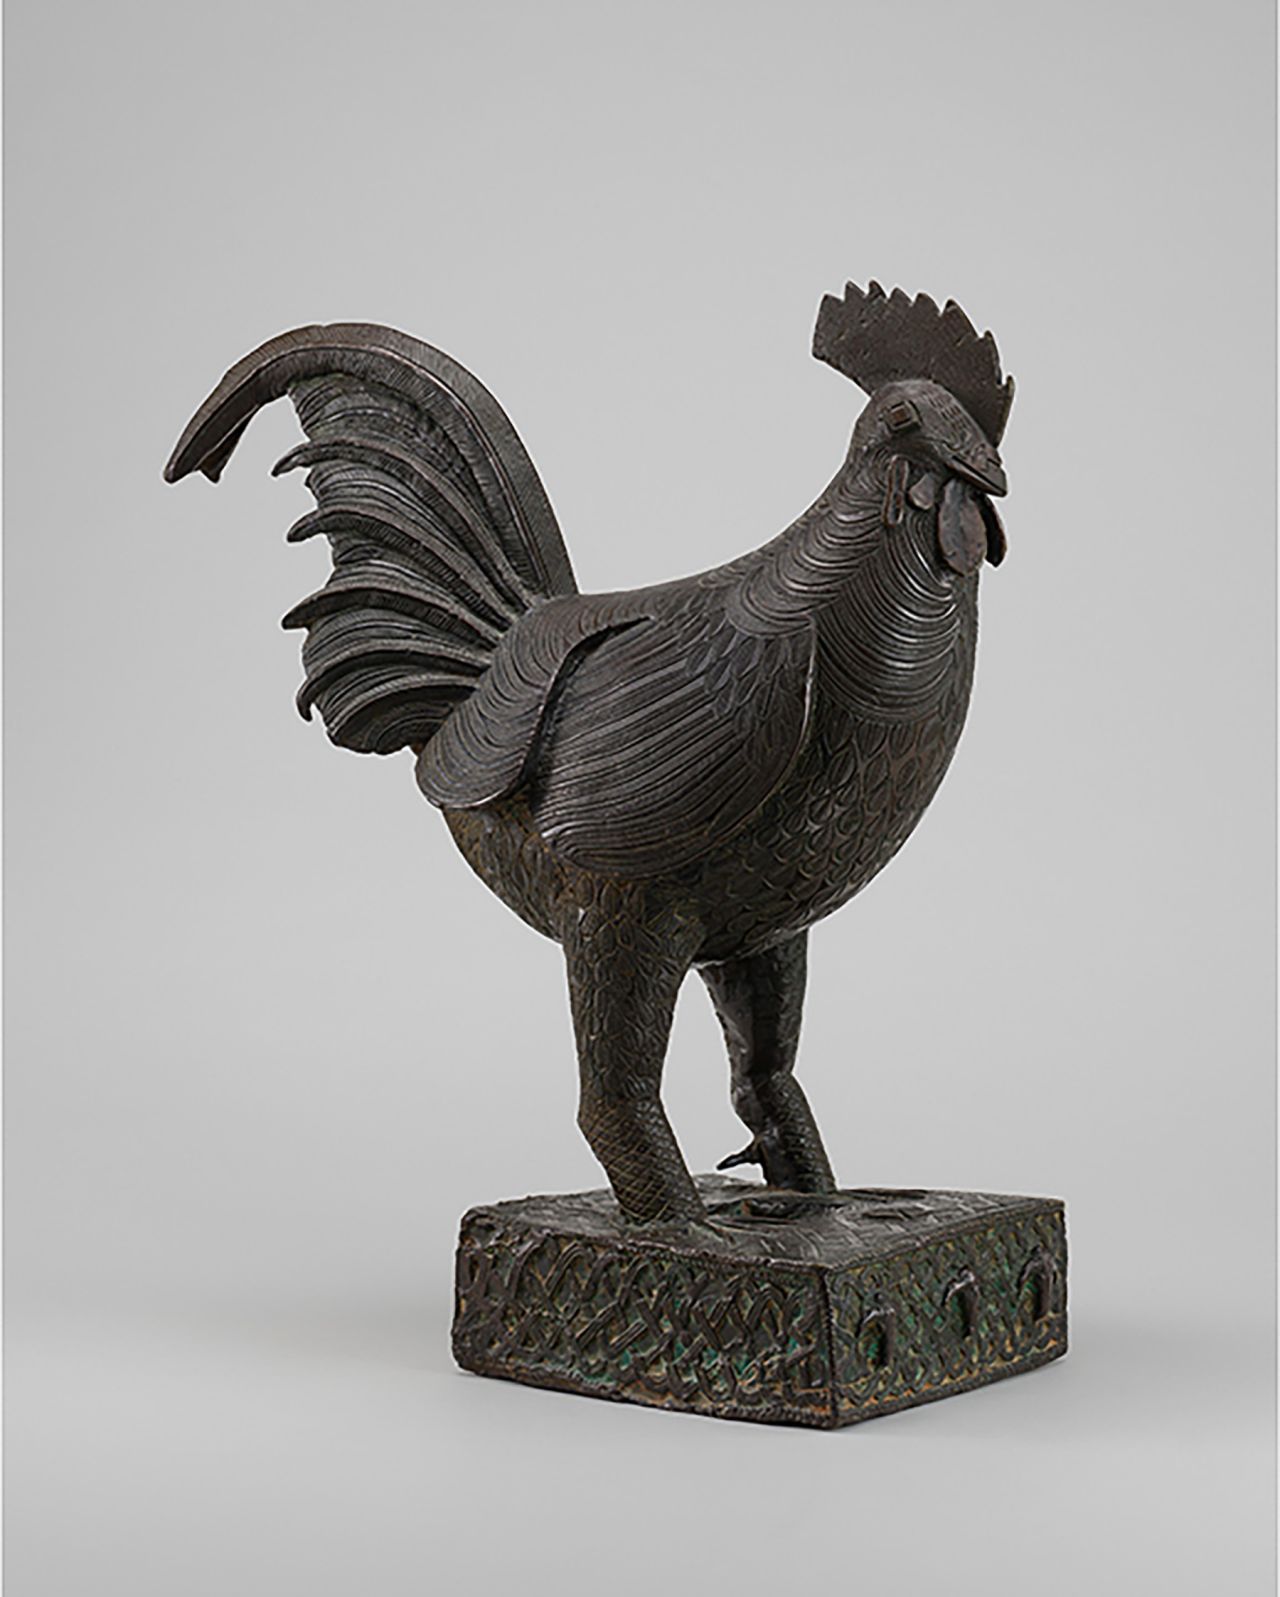 An 18th-century cockeral statue was returned by the National Gallery of Art.